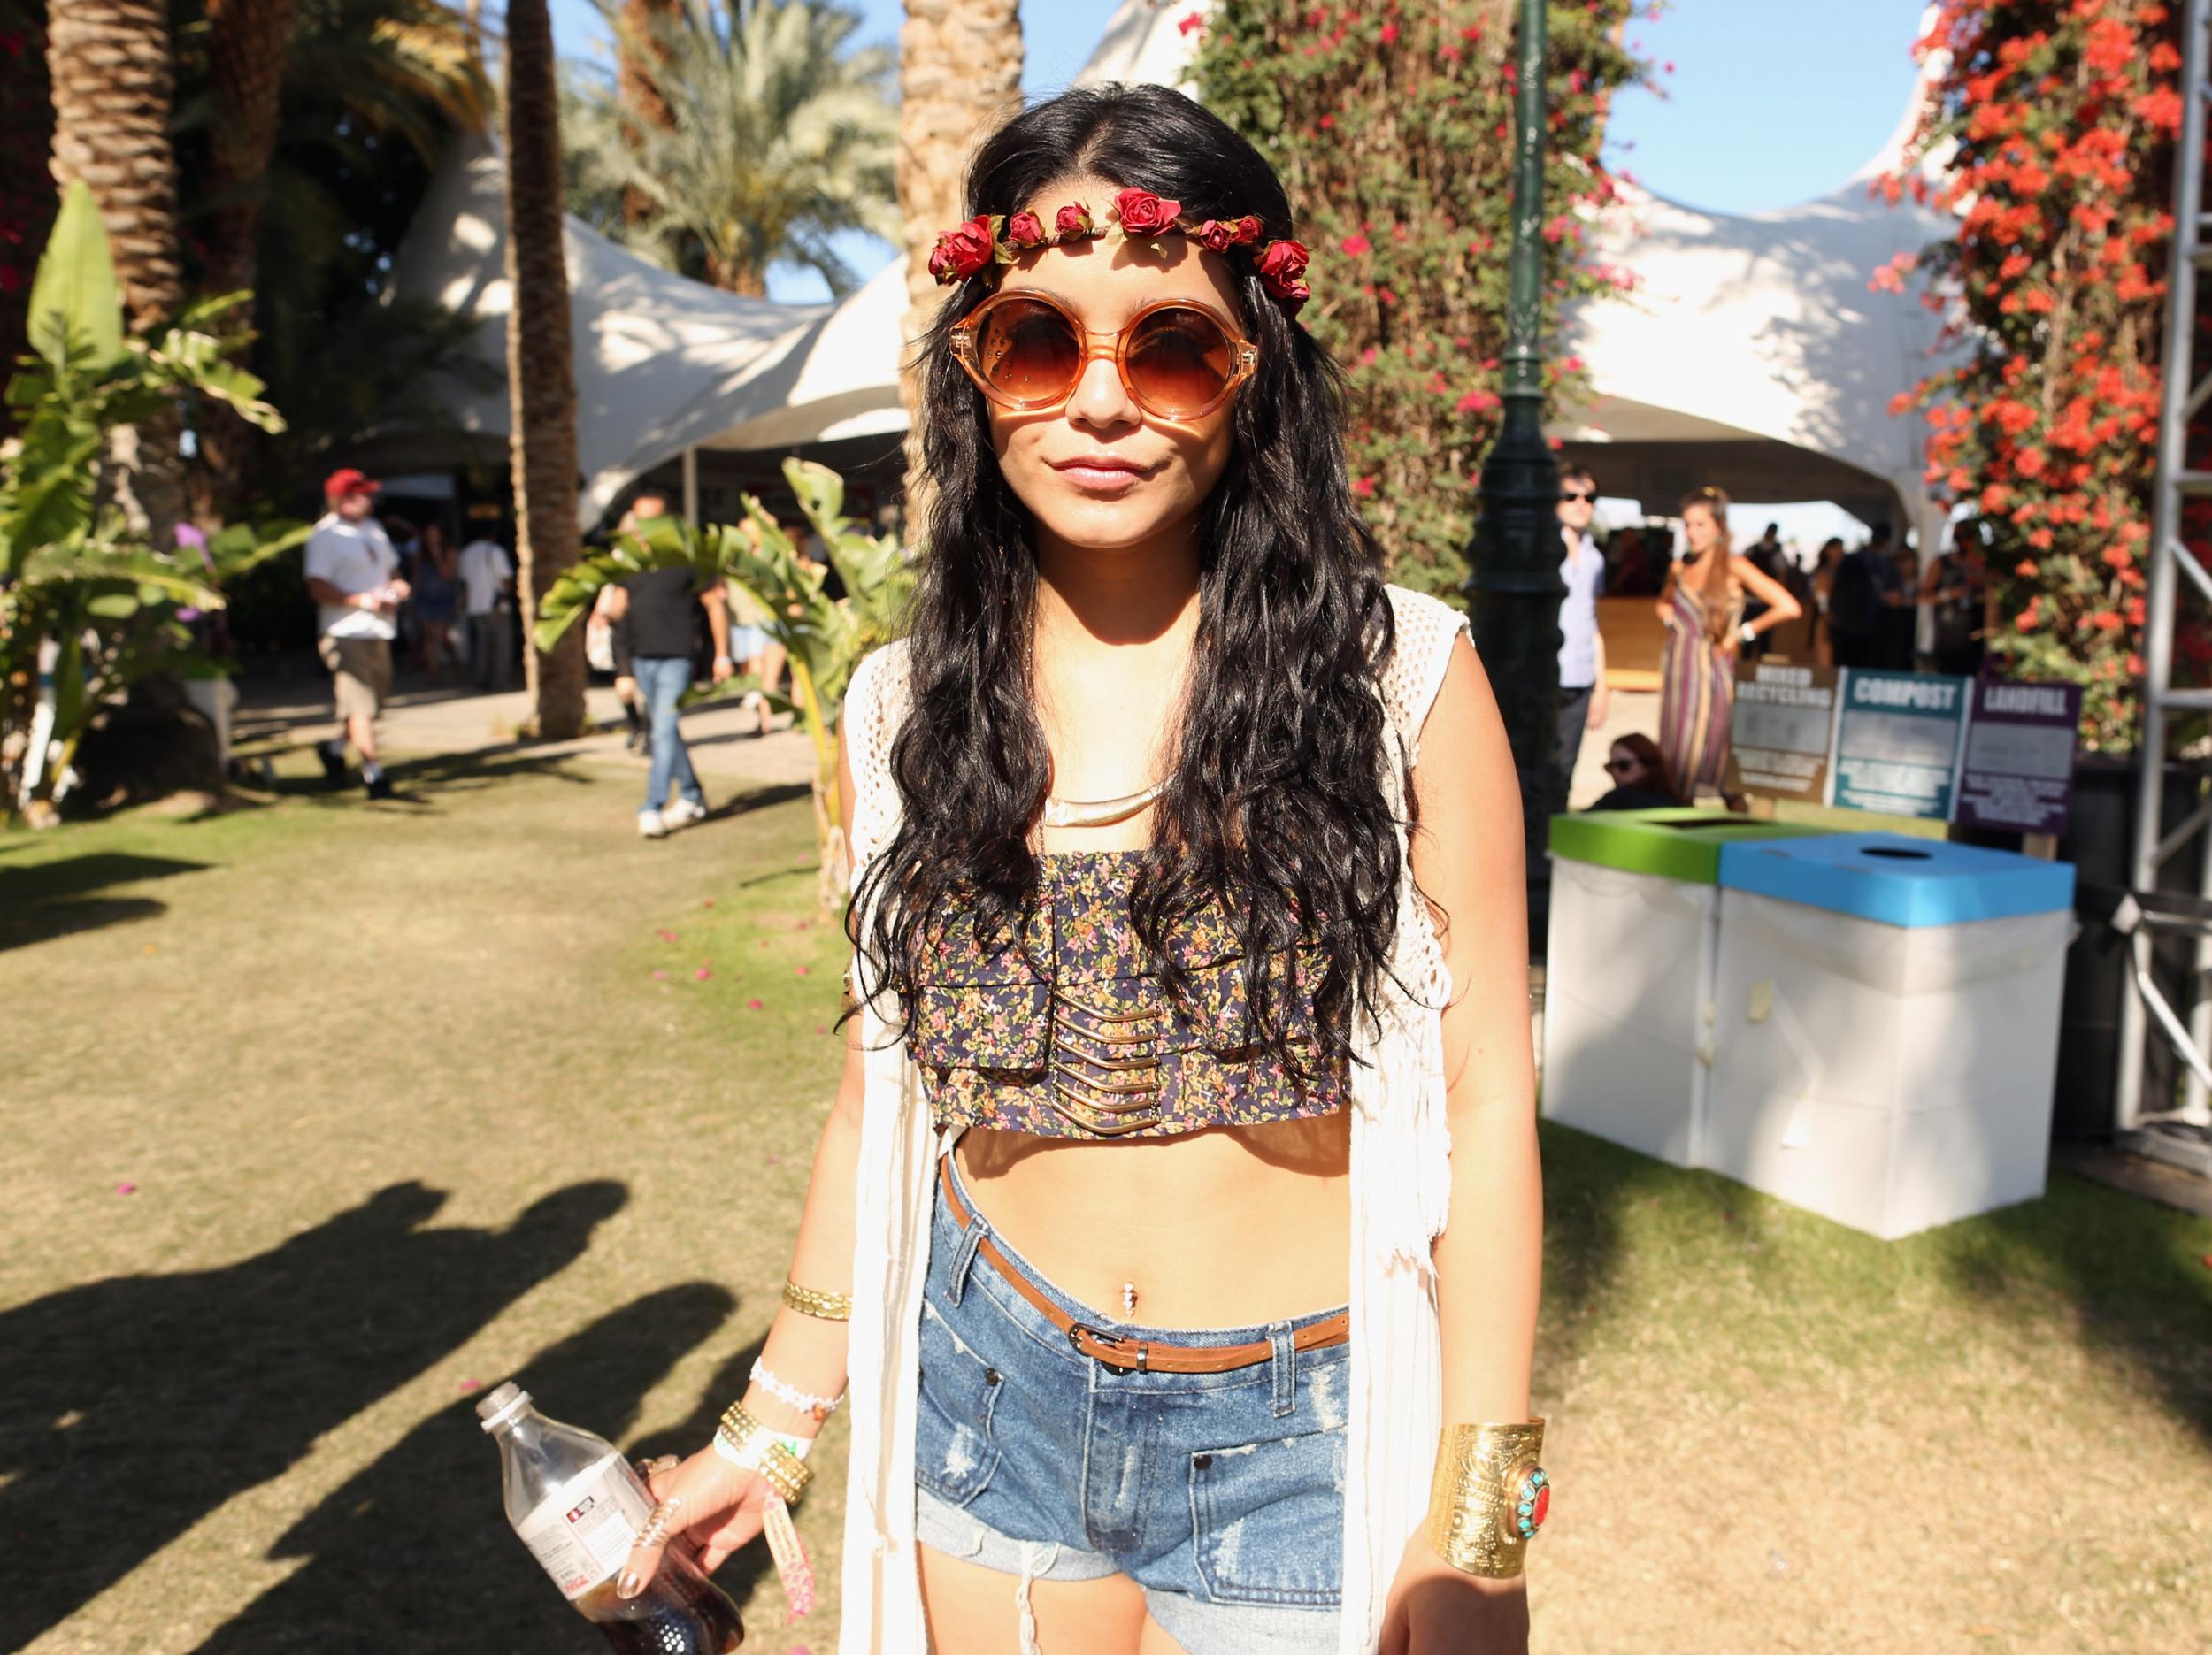 Festival fashion: The six cliché looks you won’t be able to avoid this ...